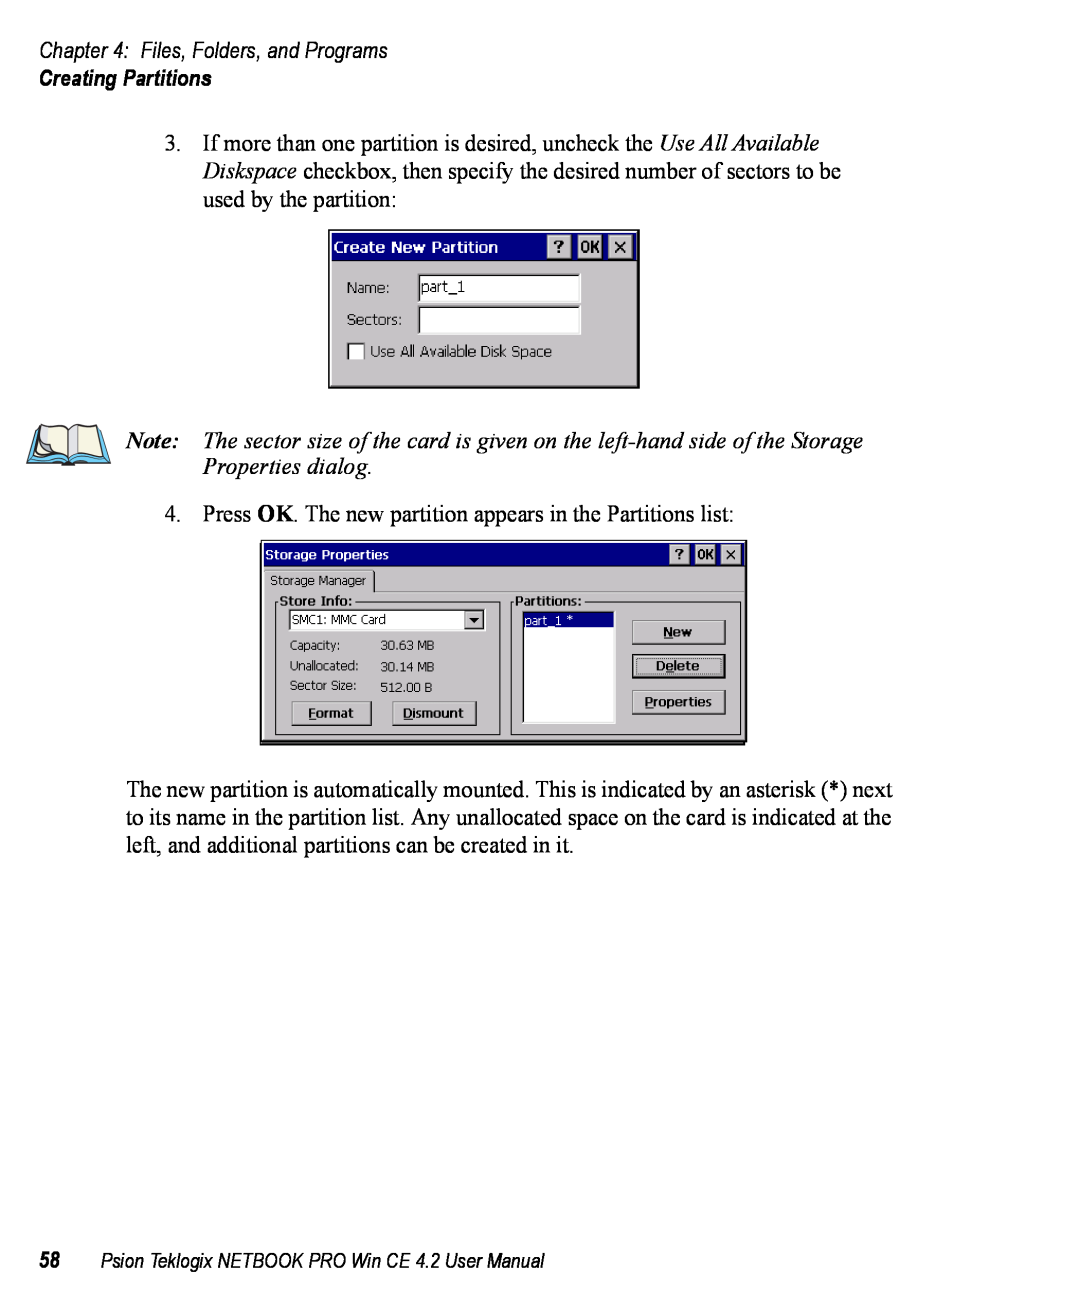 Psion Teklogix Win CE 4.2 user manual Files, Folders, and Programs, Creating Partitions 